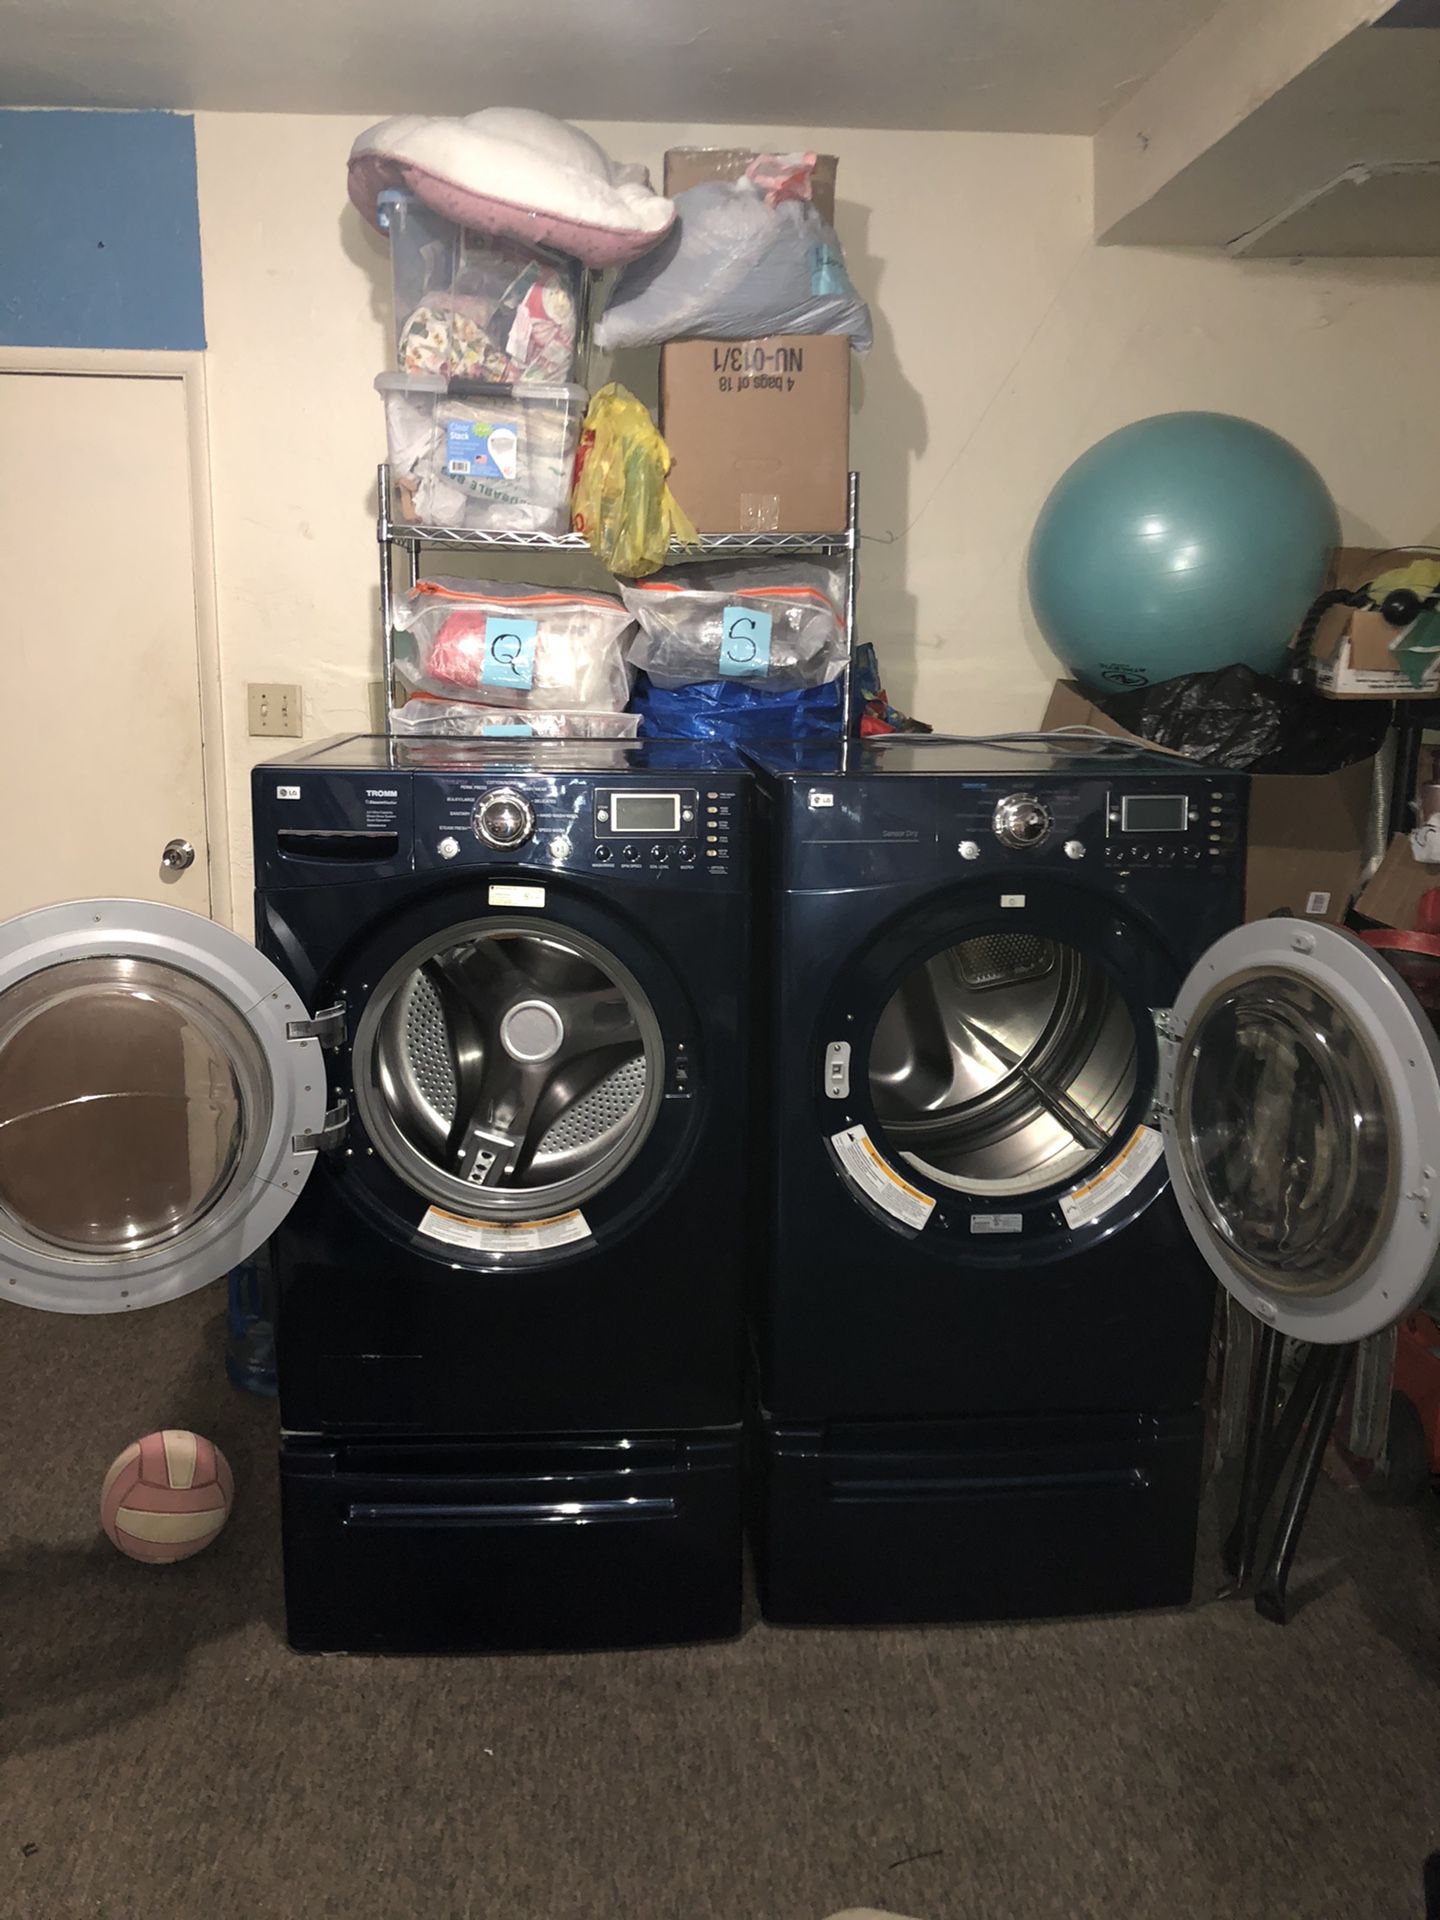 LG washer and Gas dryer